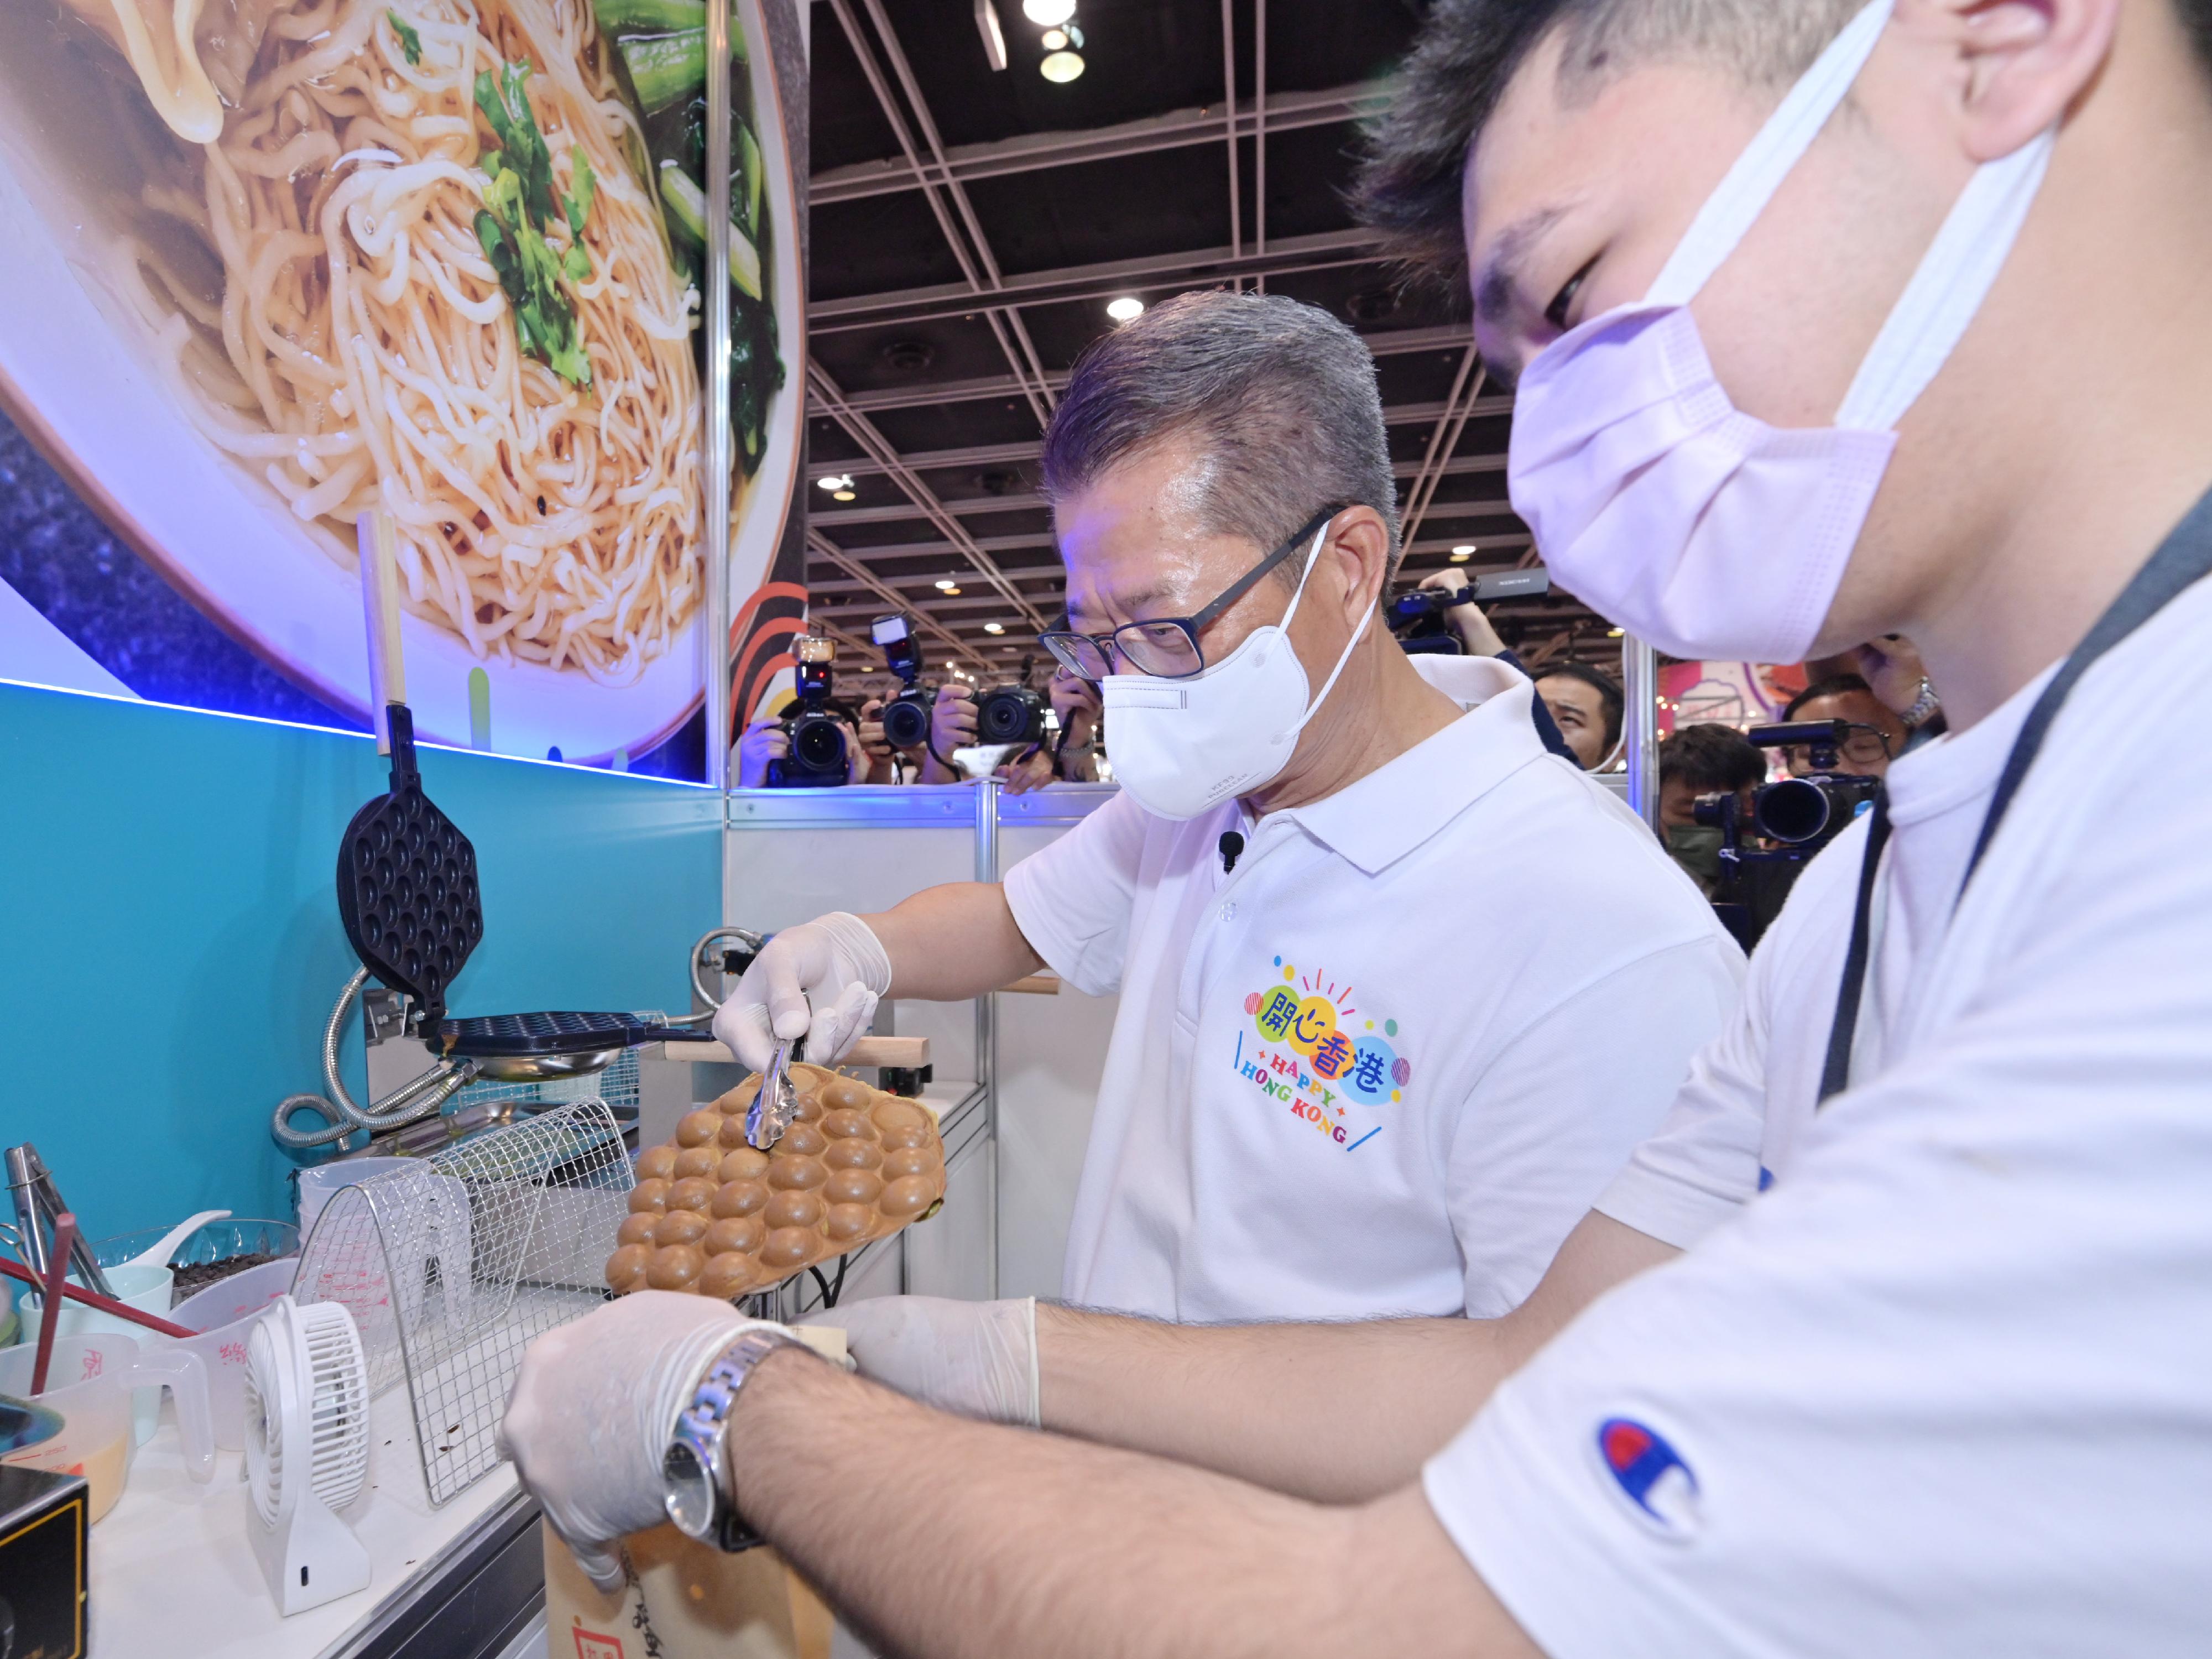 The Financial Secretary, Mr Paul Chan, officiated at the opening ceremony of the first "Happy Hong Kong" Gourmet Marketplace today (April 29). Photo shows Mr Chan (left) preparing egg waffle with an exhibitor.